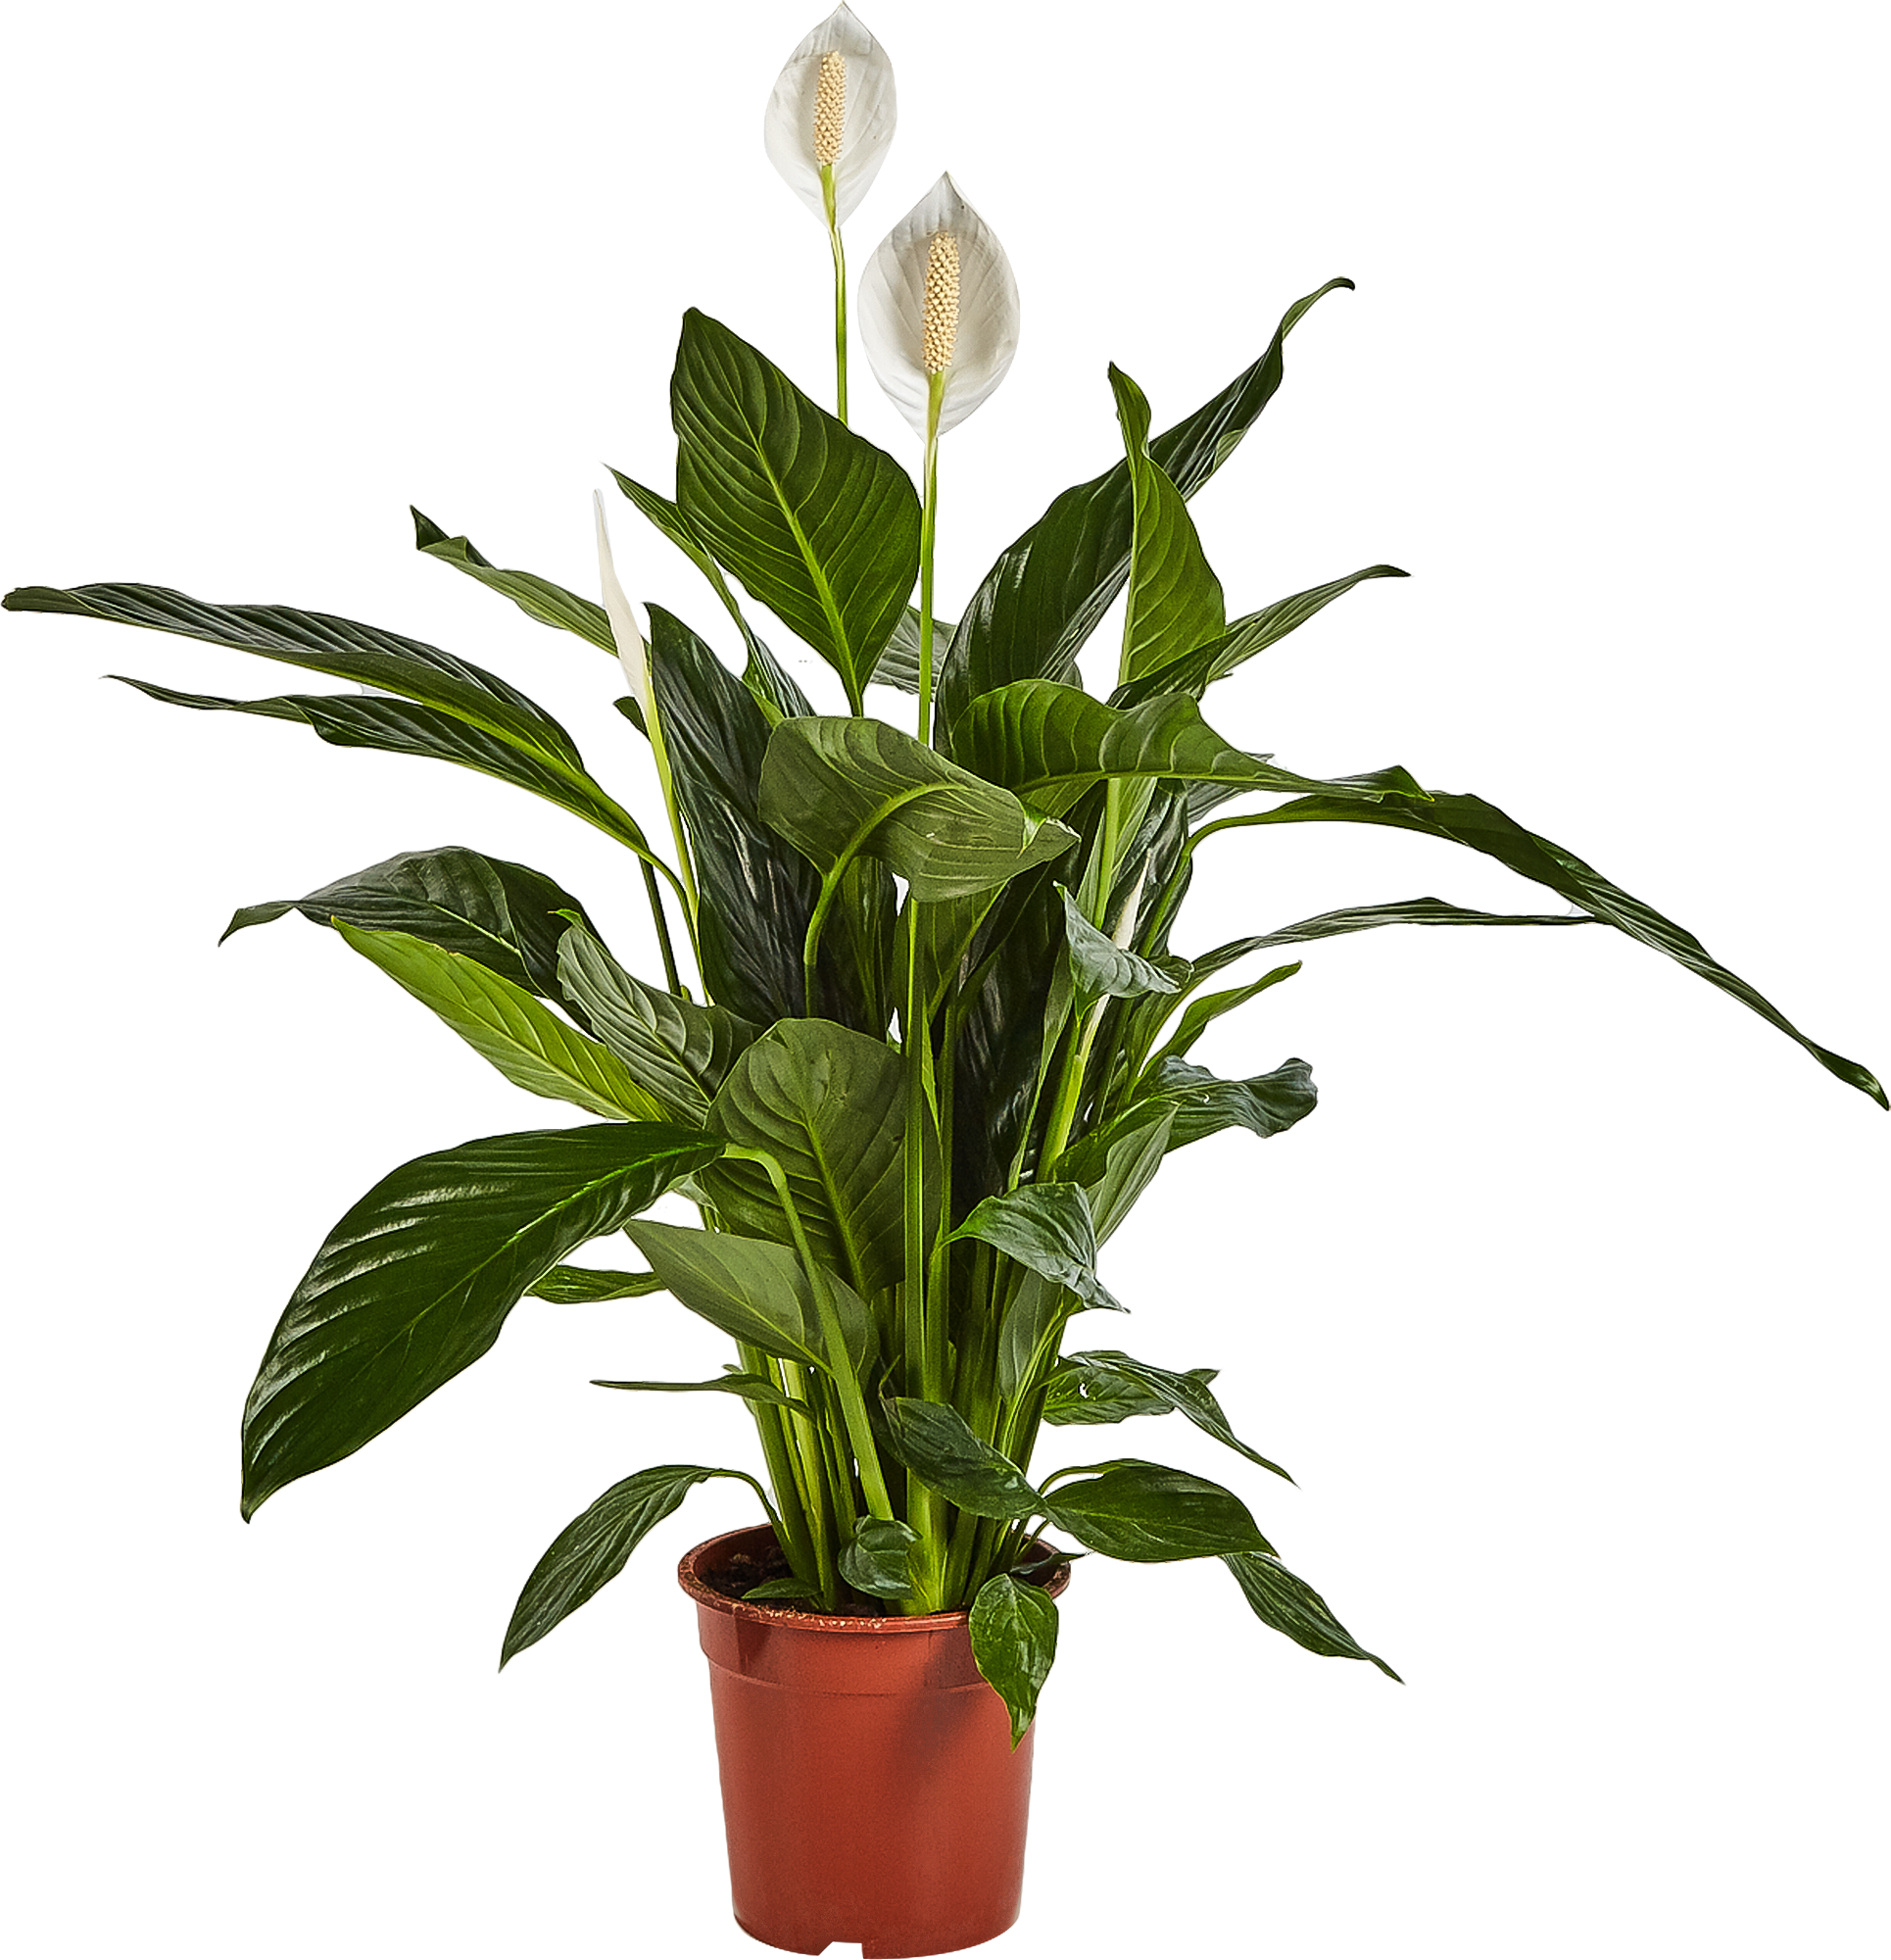 Spathiphyllum Sweet Chico - Peace Lilly Plant - Indoor Flowering House Plant - نبات داخلي